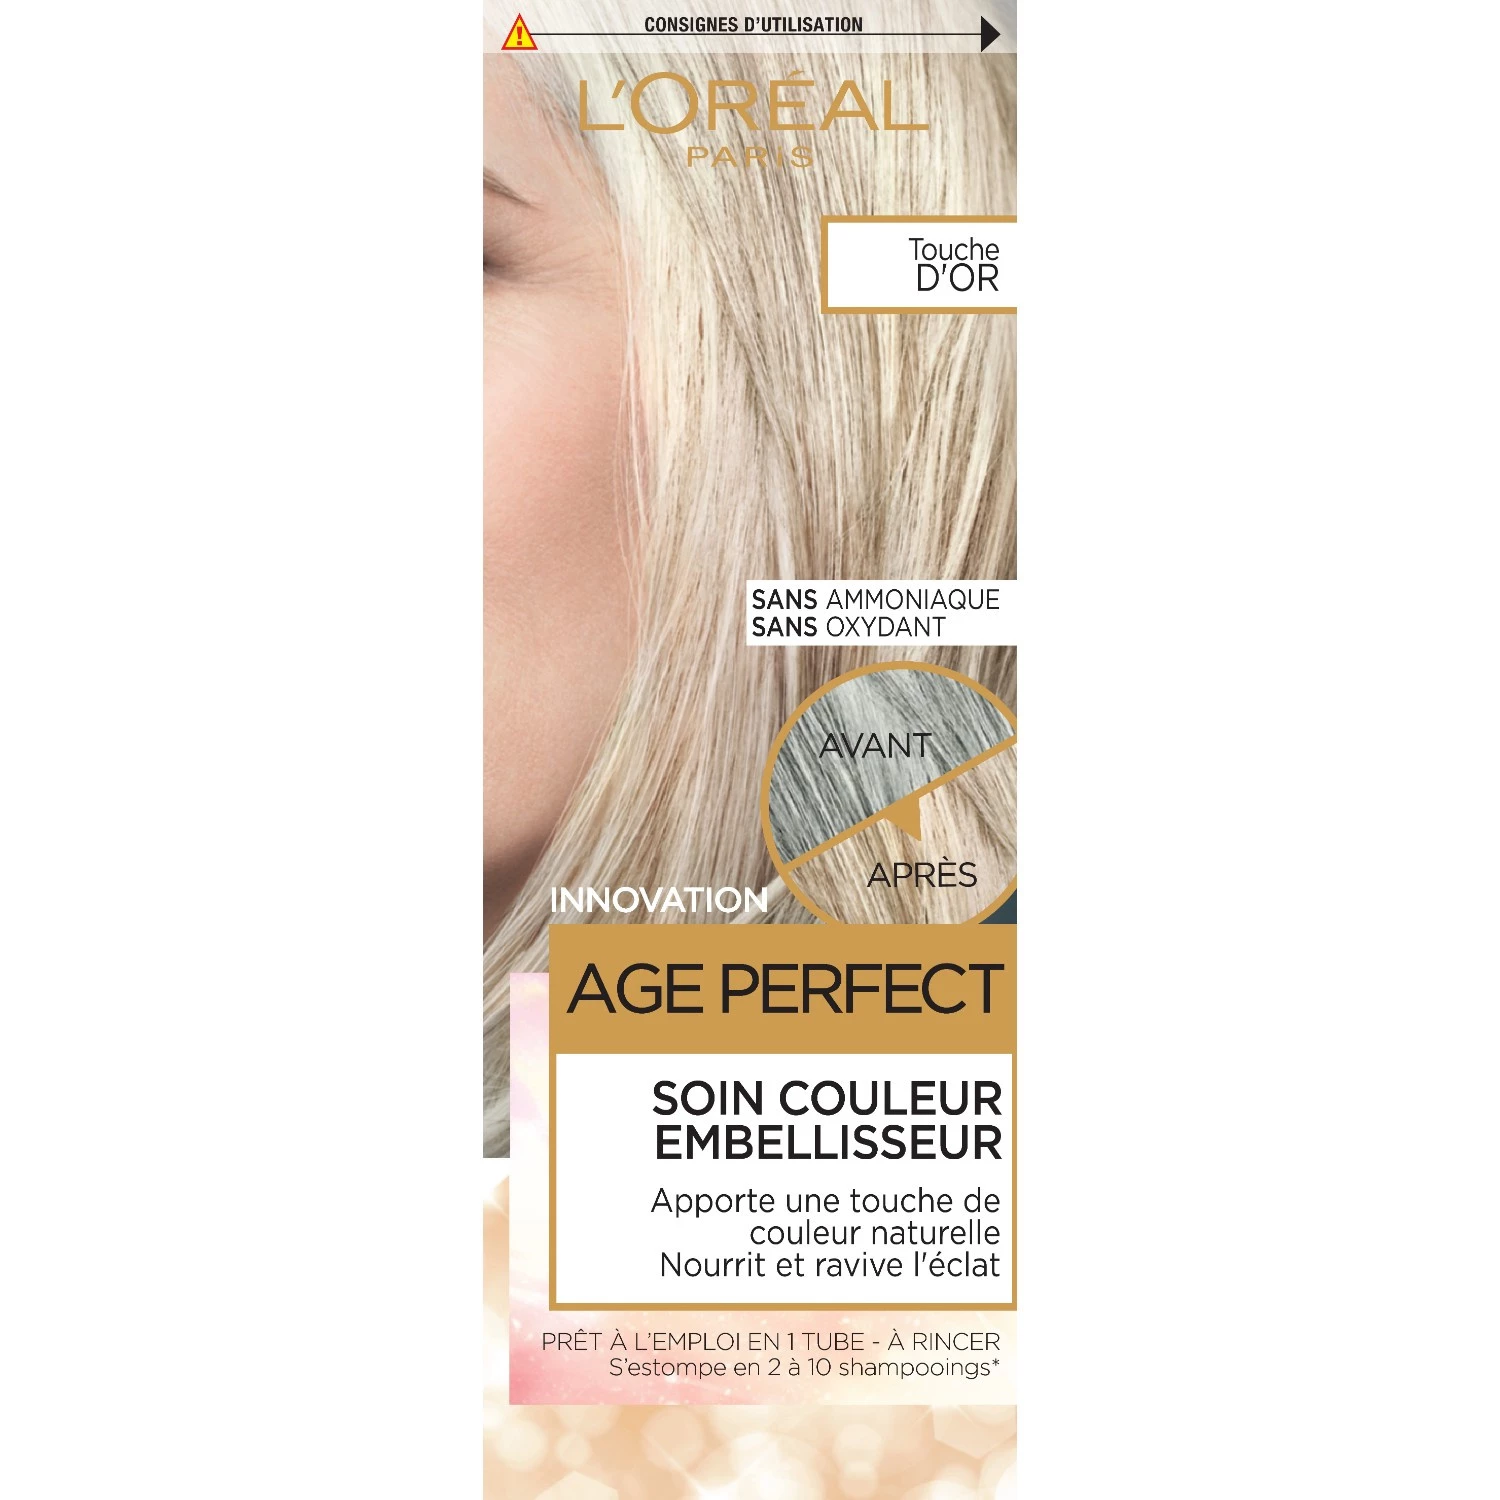 Excell Age Perf Softones Or